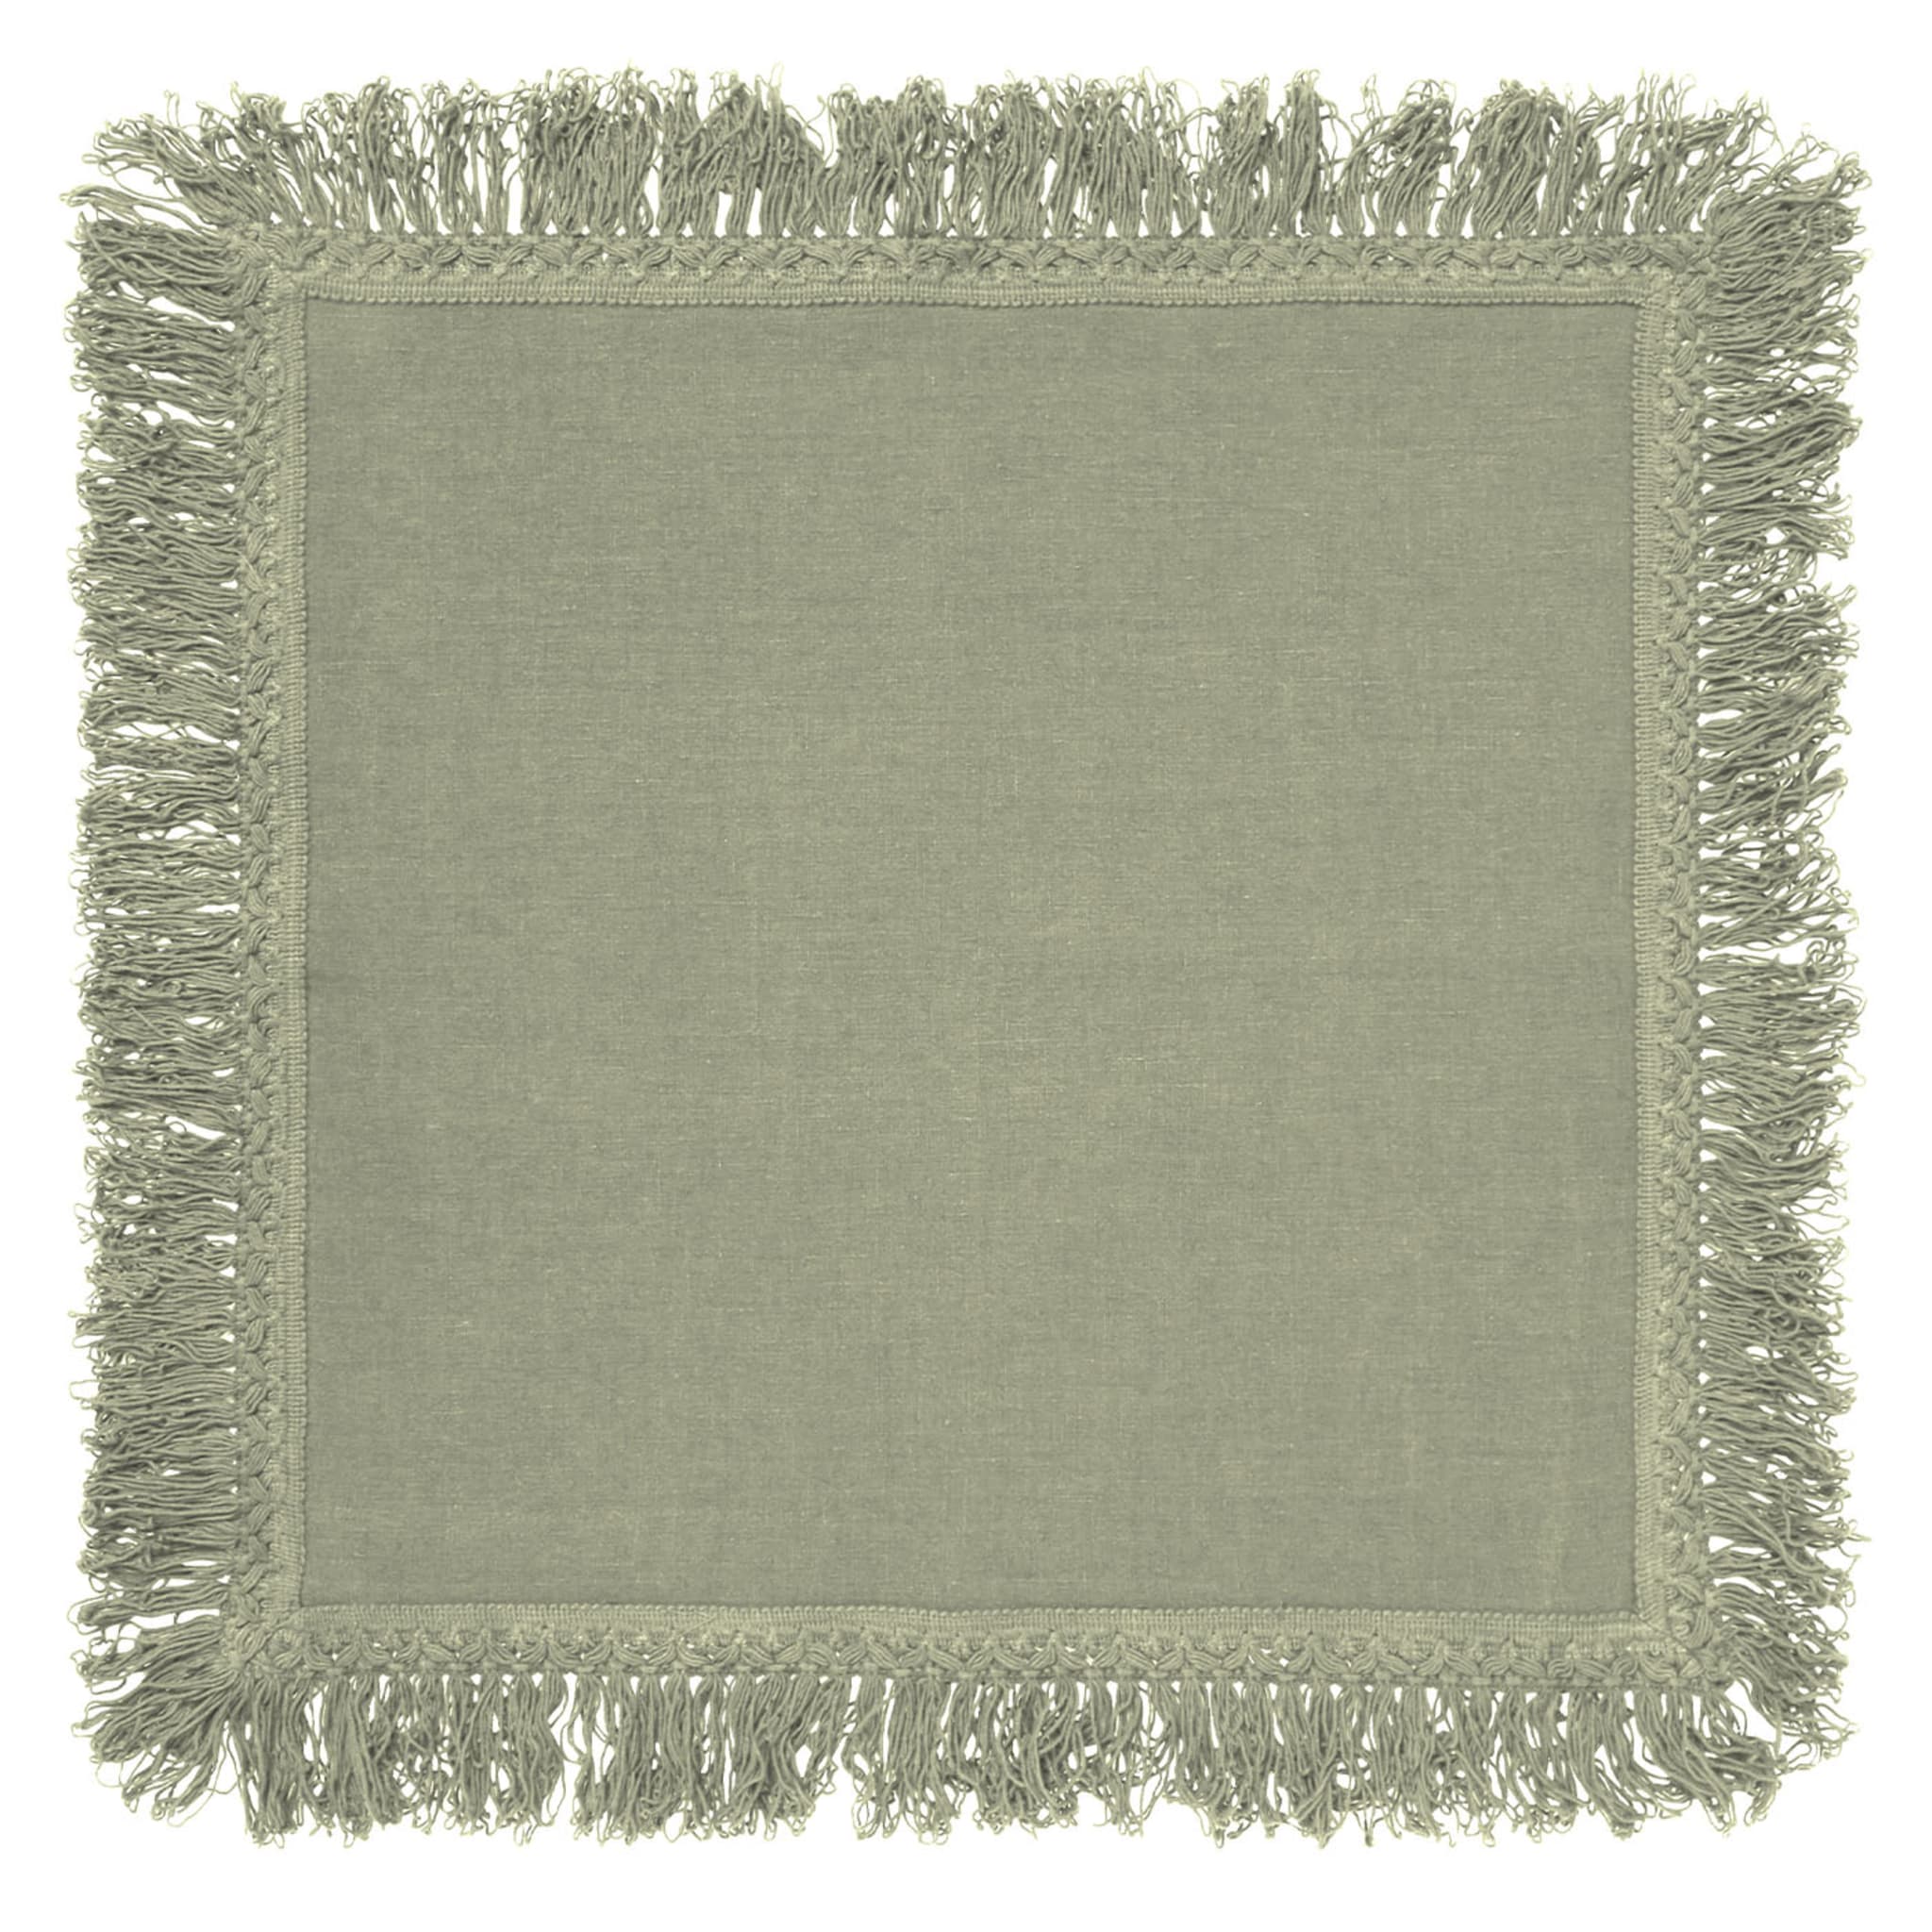 Set of 4 Mint Napkins with Long Fringes - Alternative view 1